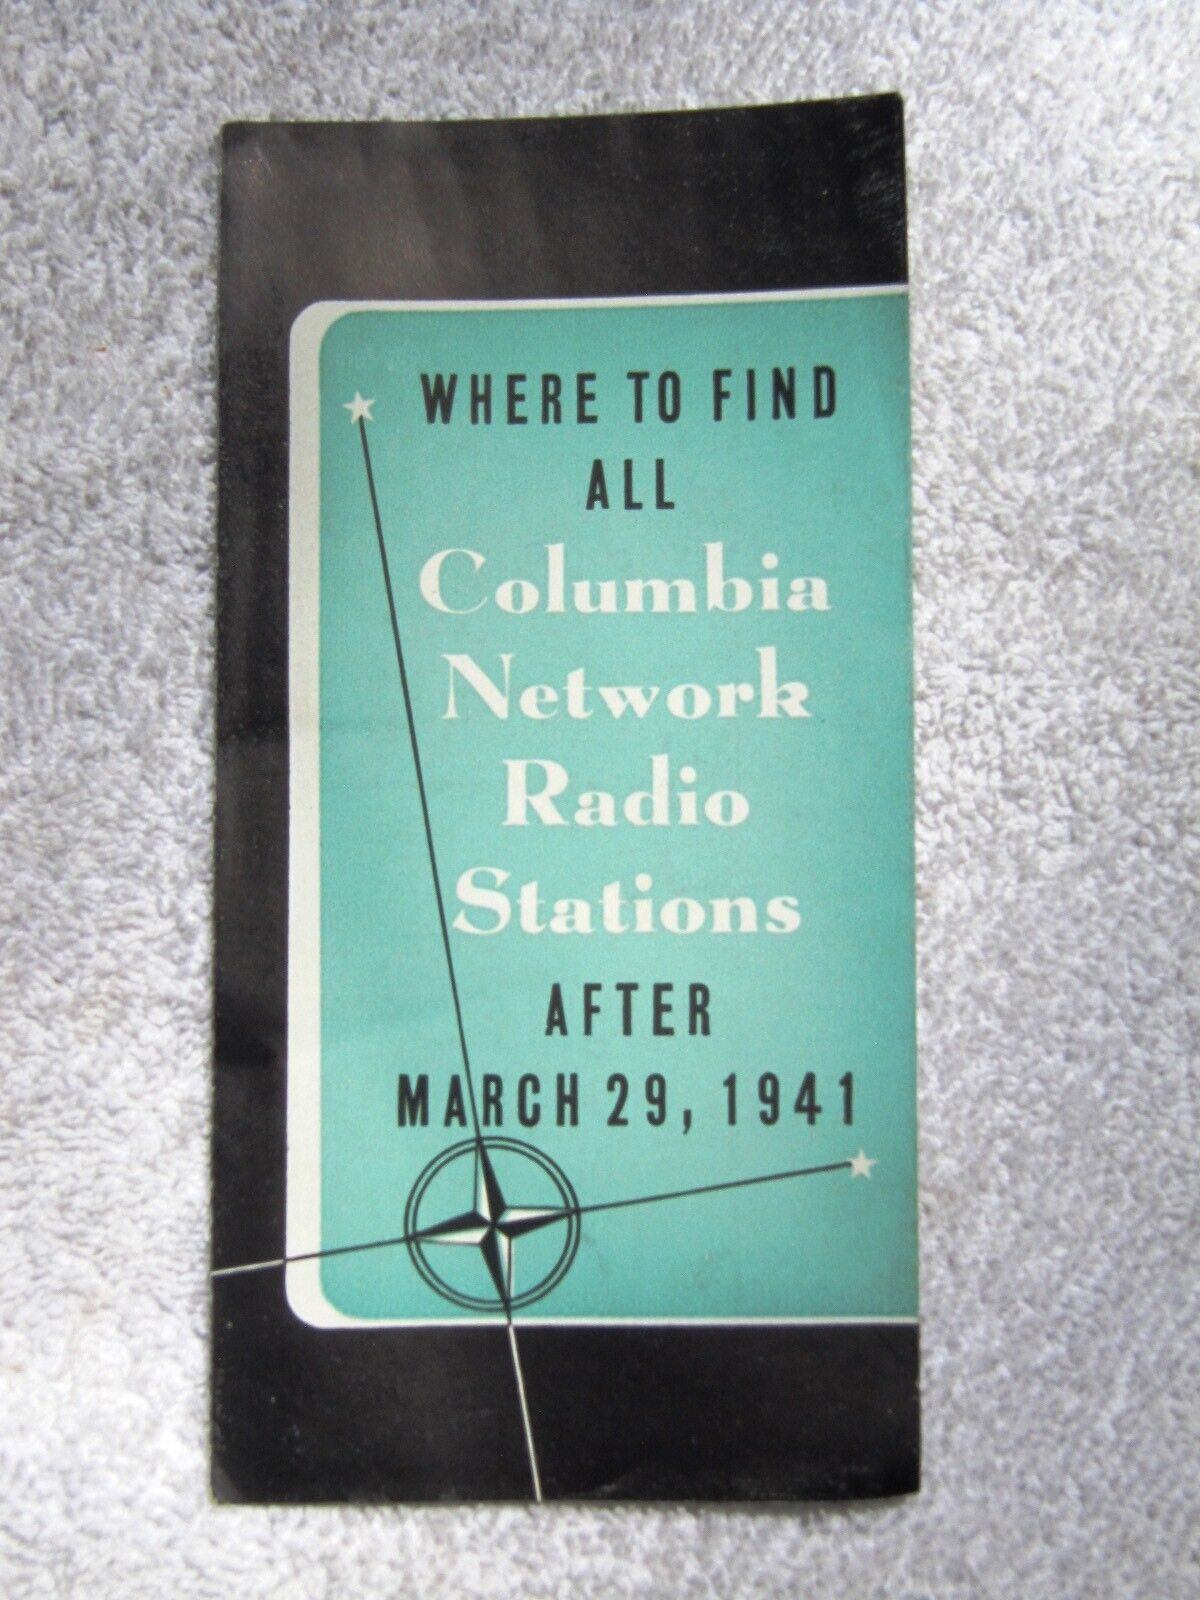  March 29, 1941 AM Station Reassigment Find All COLUMBIA NETWORK RADIO STATIONS